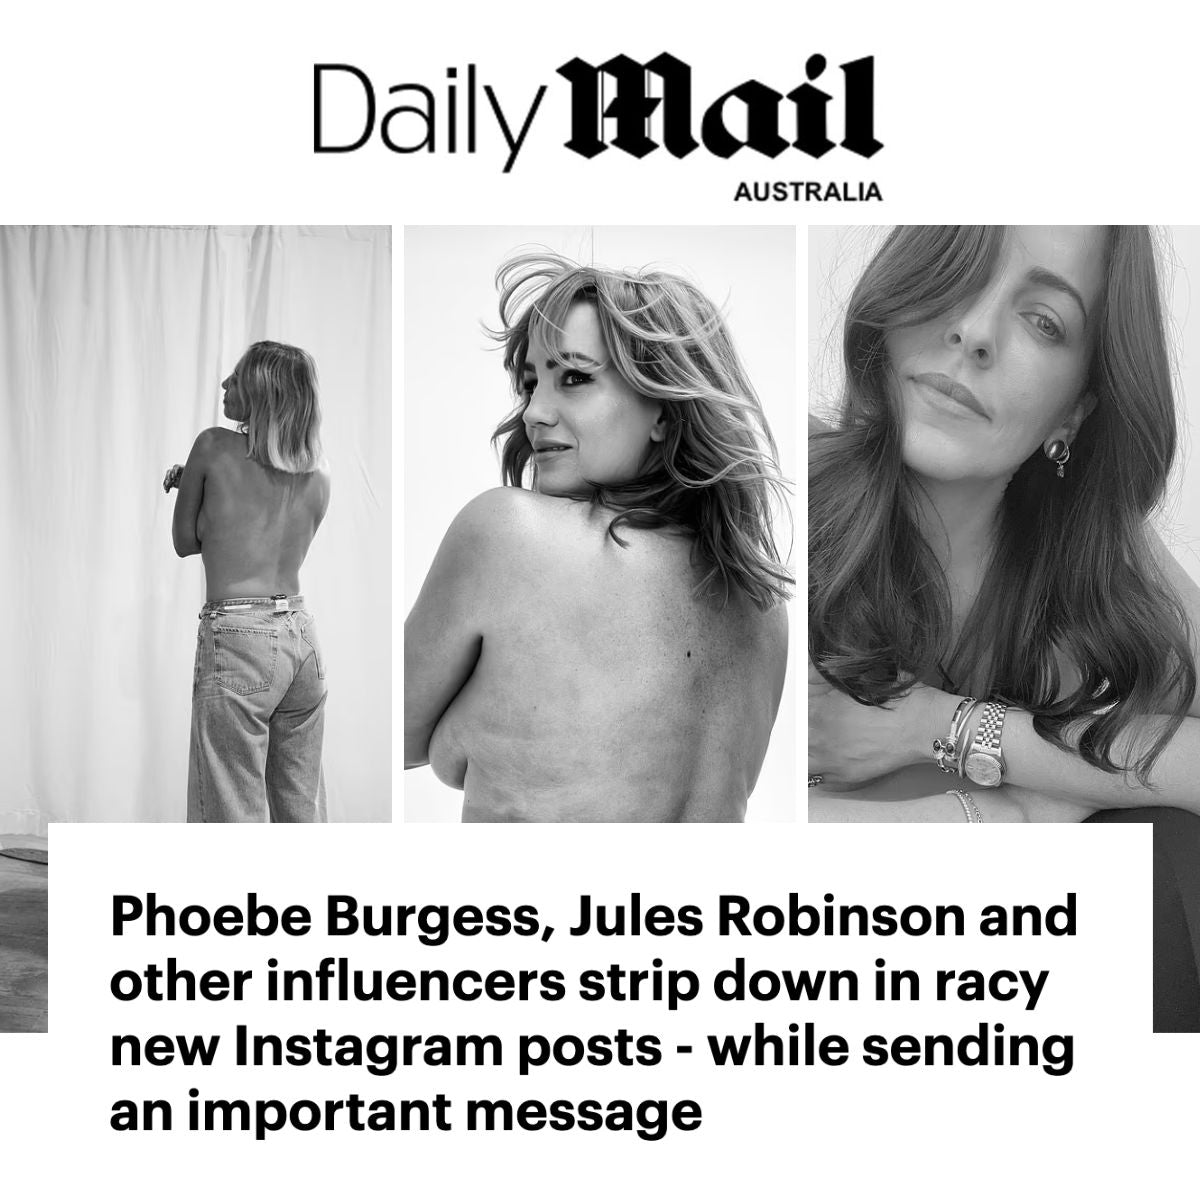 Phoebe Burgess, Jules Robinson and other influencers strip down in racy new Instagram posts - while sending an important message